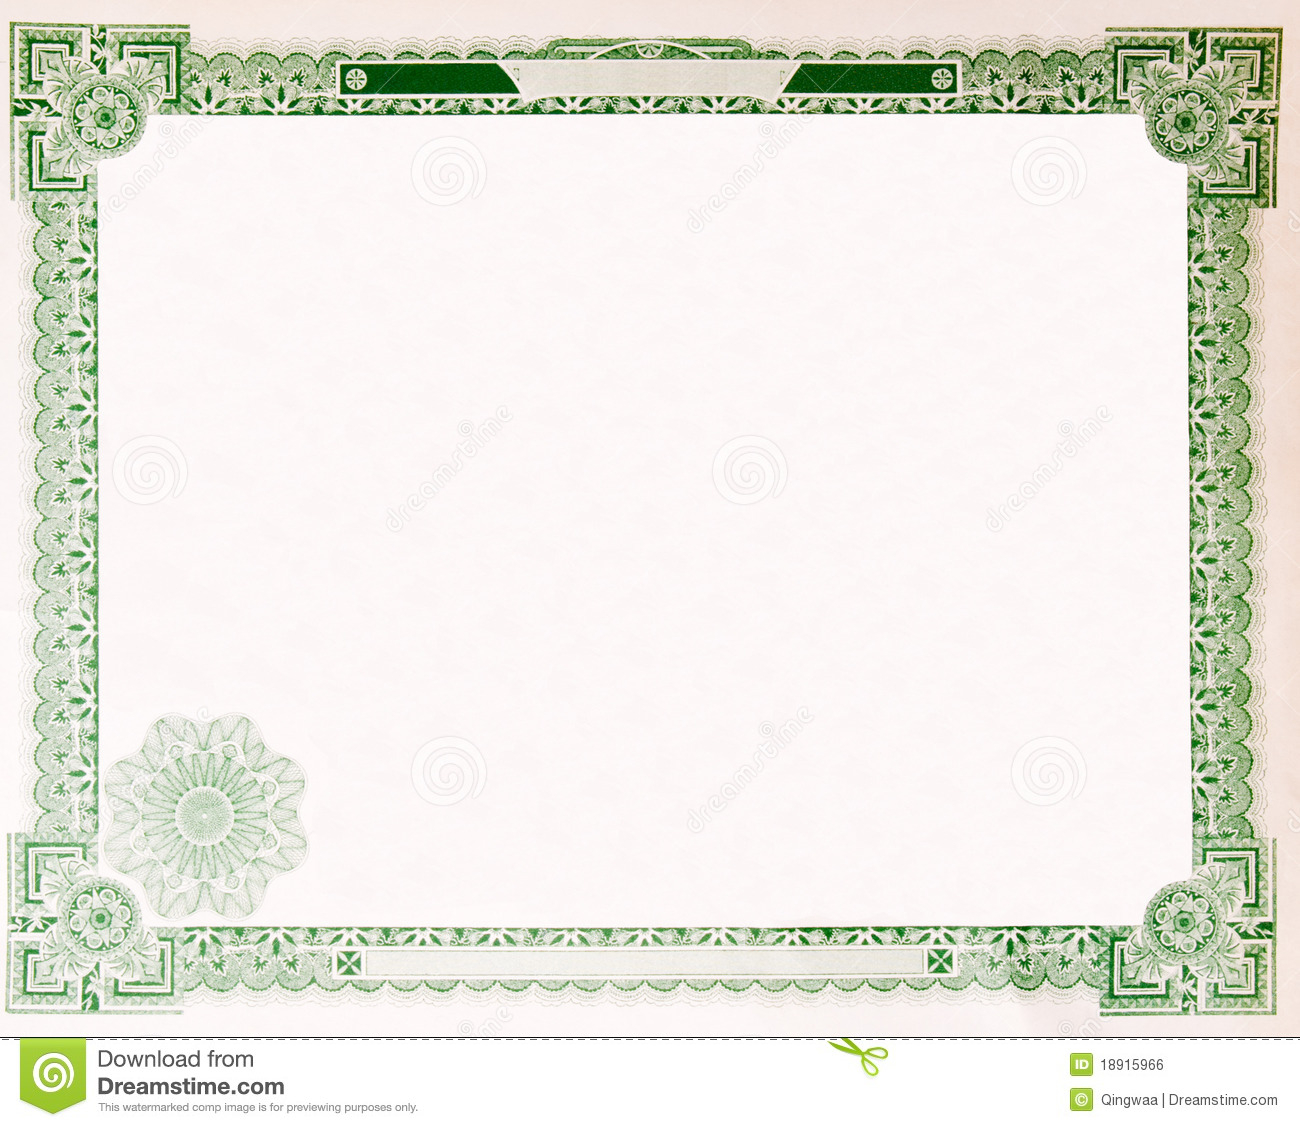 10 Stock Certificate Frame Stock Photos - Free & Royalty-Free  In Blank Share Certificate Template Free